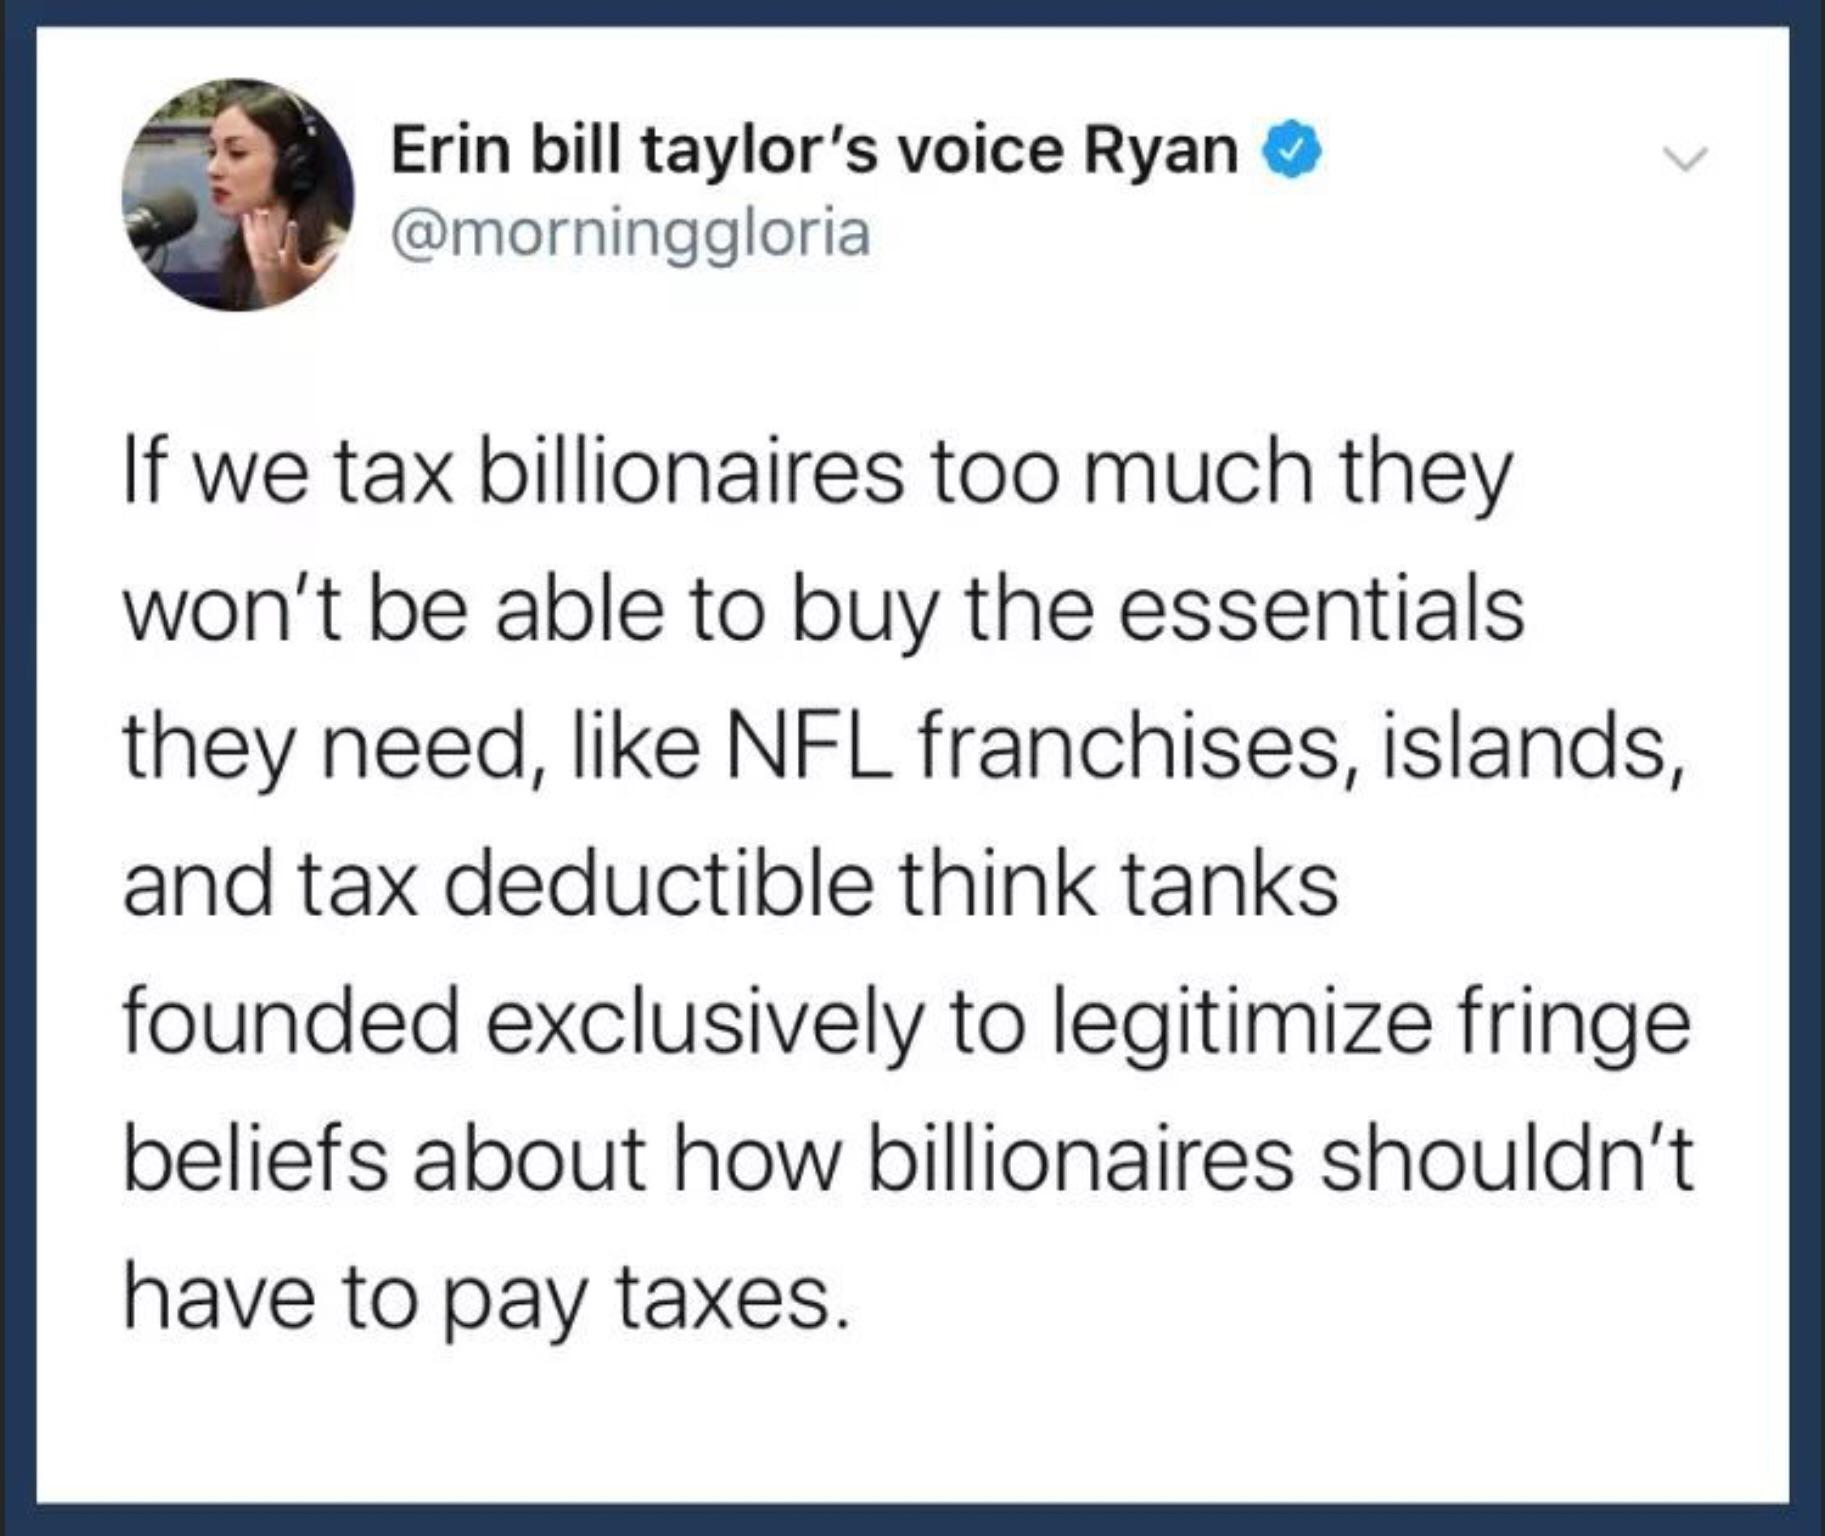 Political Tweet, Morning Gloria, Tax, Billionaires political-memes political text: Erin bill taylor's voice Ryan @morninggloria If we tax billionaires too much they won't be able to buy the essentials they need, like NFL franchises, islands, and tax deductible think tanks founded exclusively to legitimize fringe beliefs about how billionaires shouldn't have to pay taxes. 